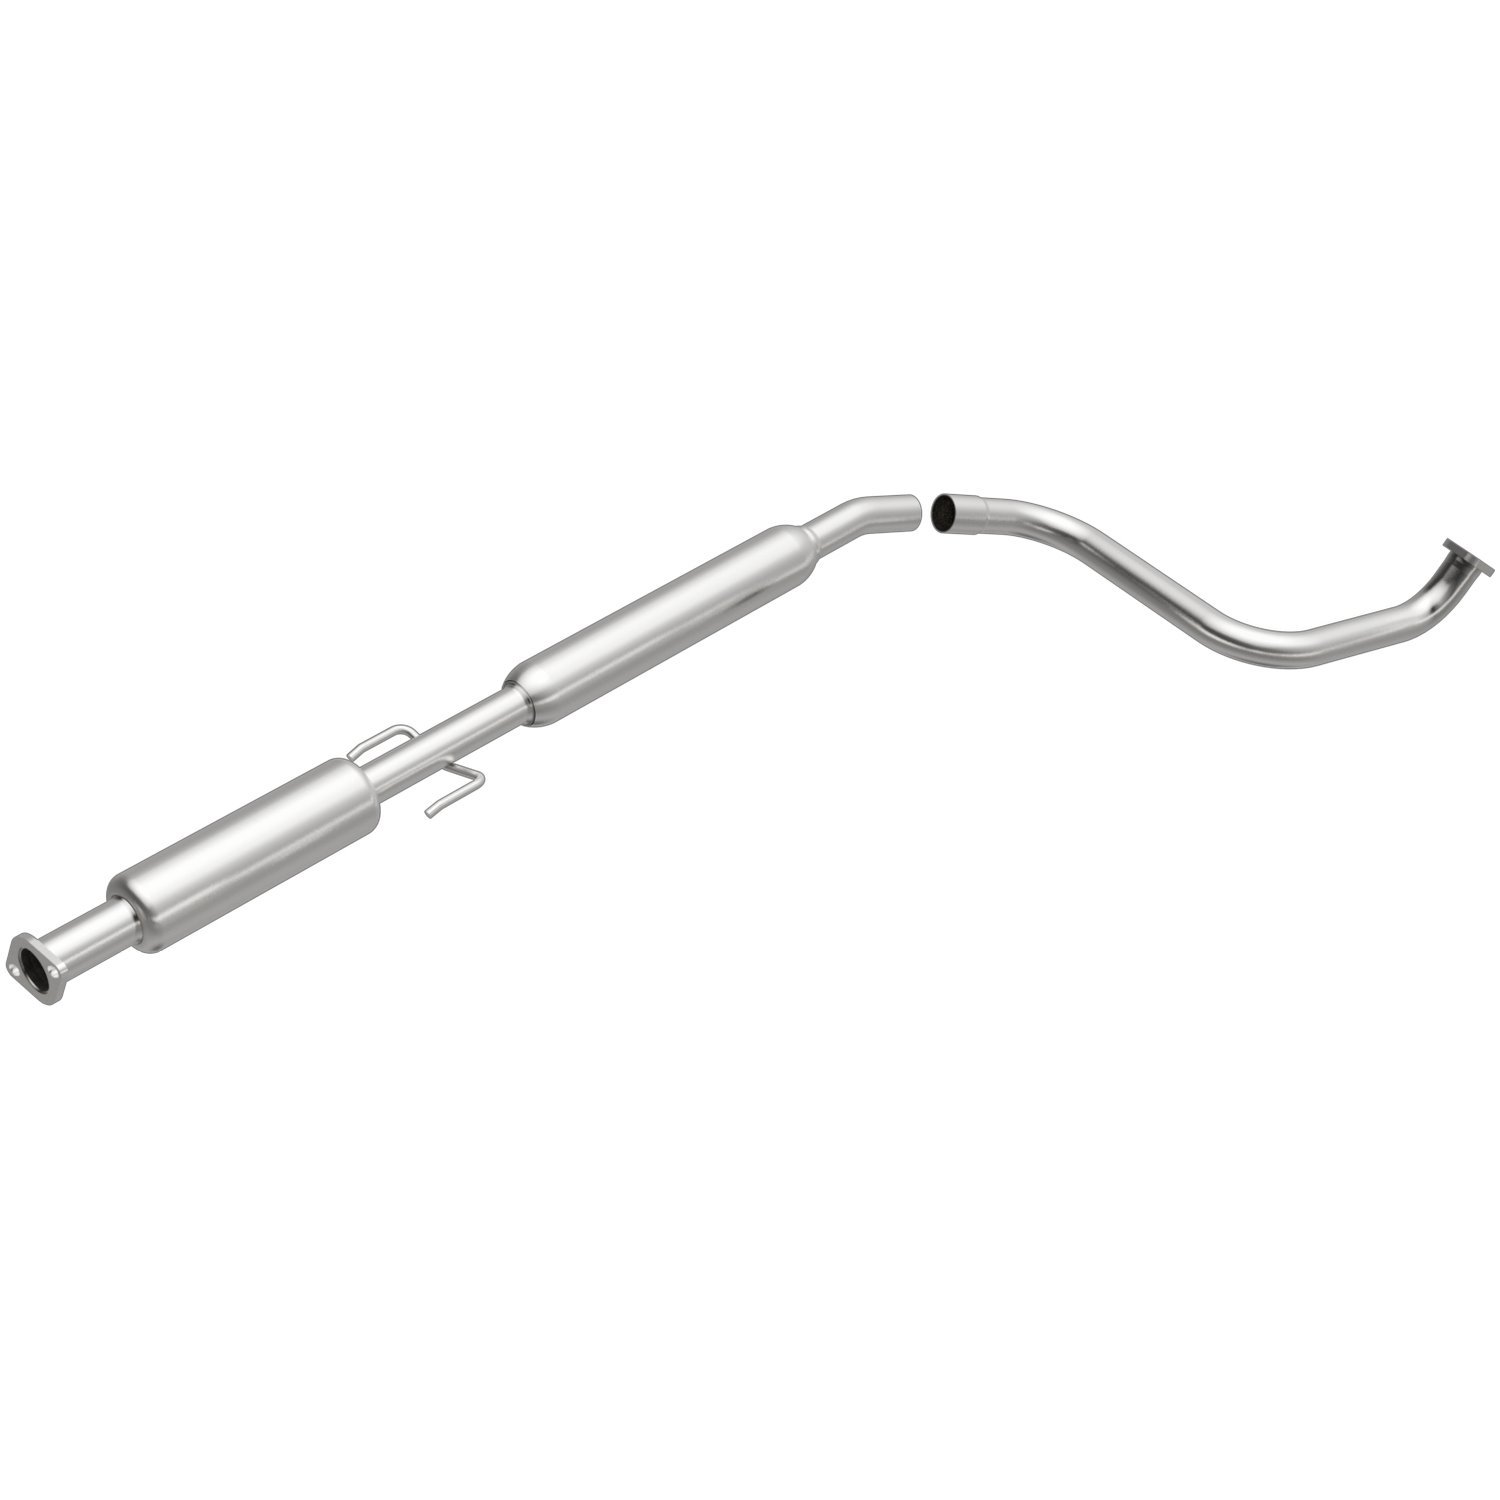 Direct-Fit Exhaust Resonator and Pipe Assembly, 2004-2008 Chevy Aveo/Aveo5, Swift+, Wave/Wave5 1.6L